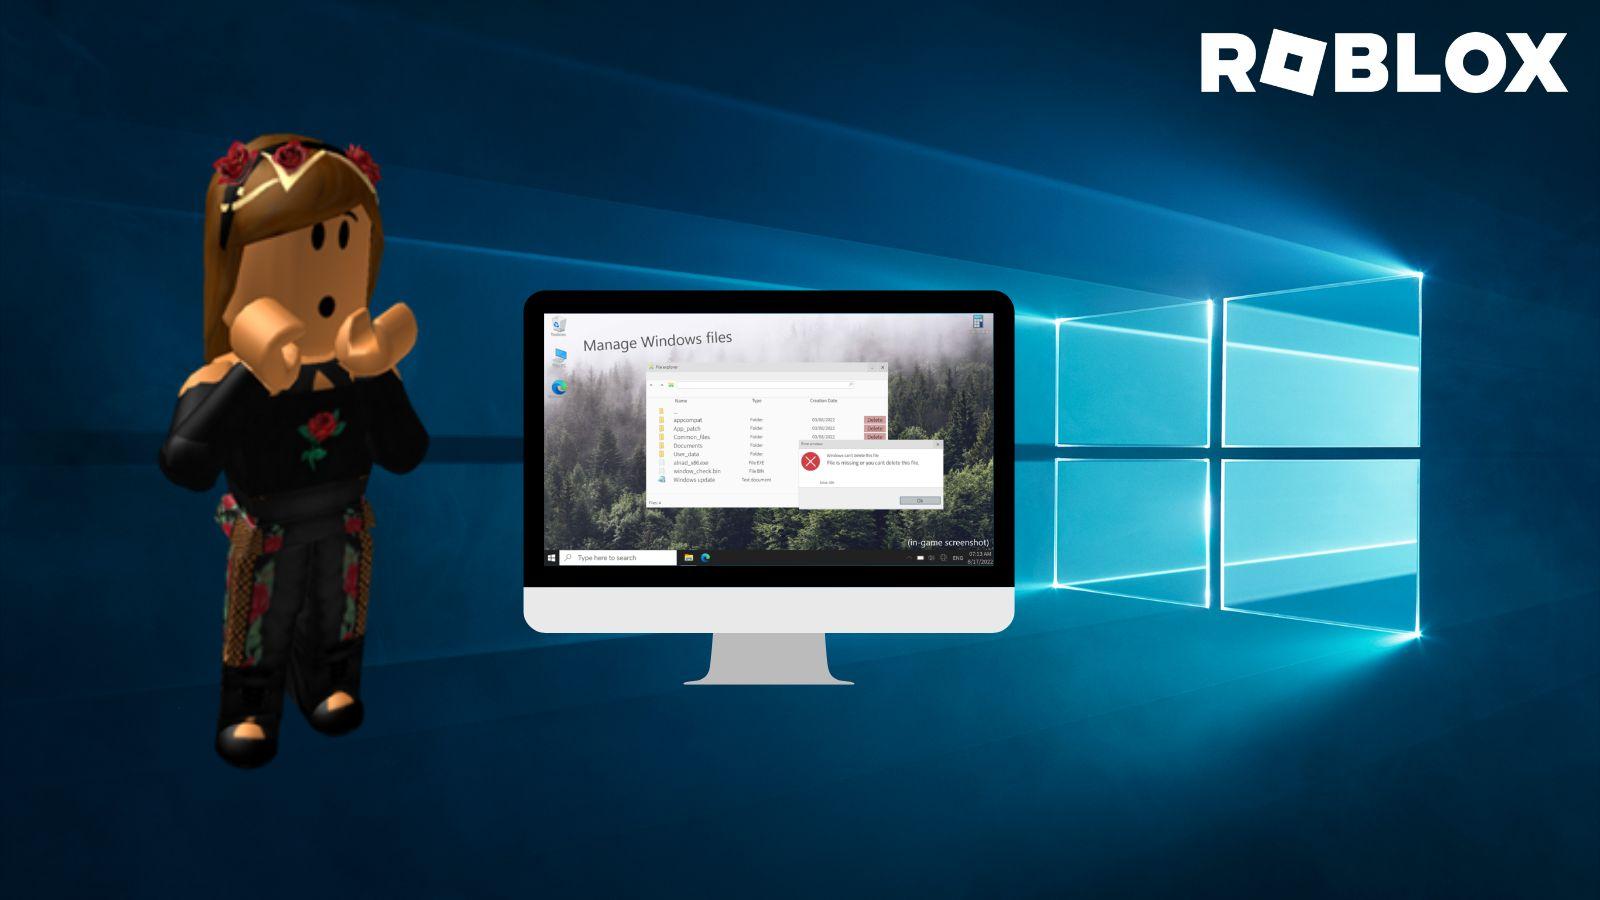 Roblox and Windows 10 experience